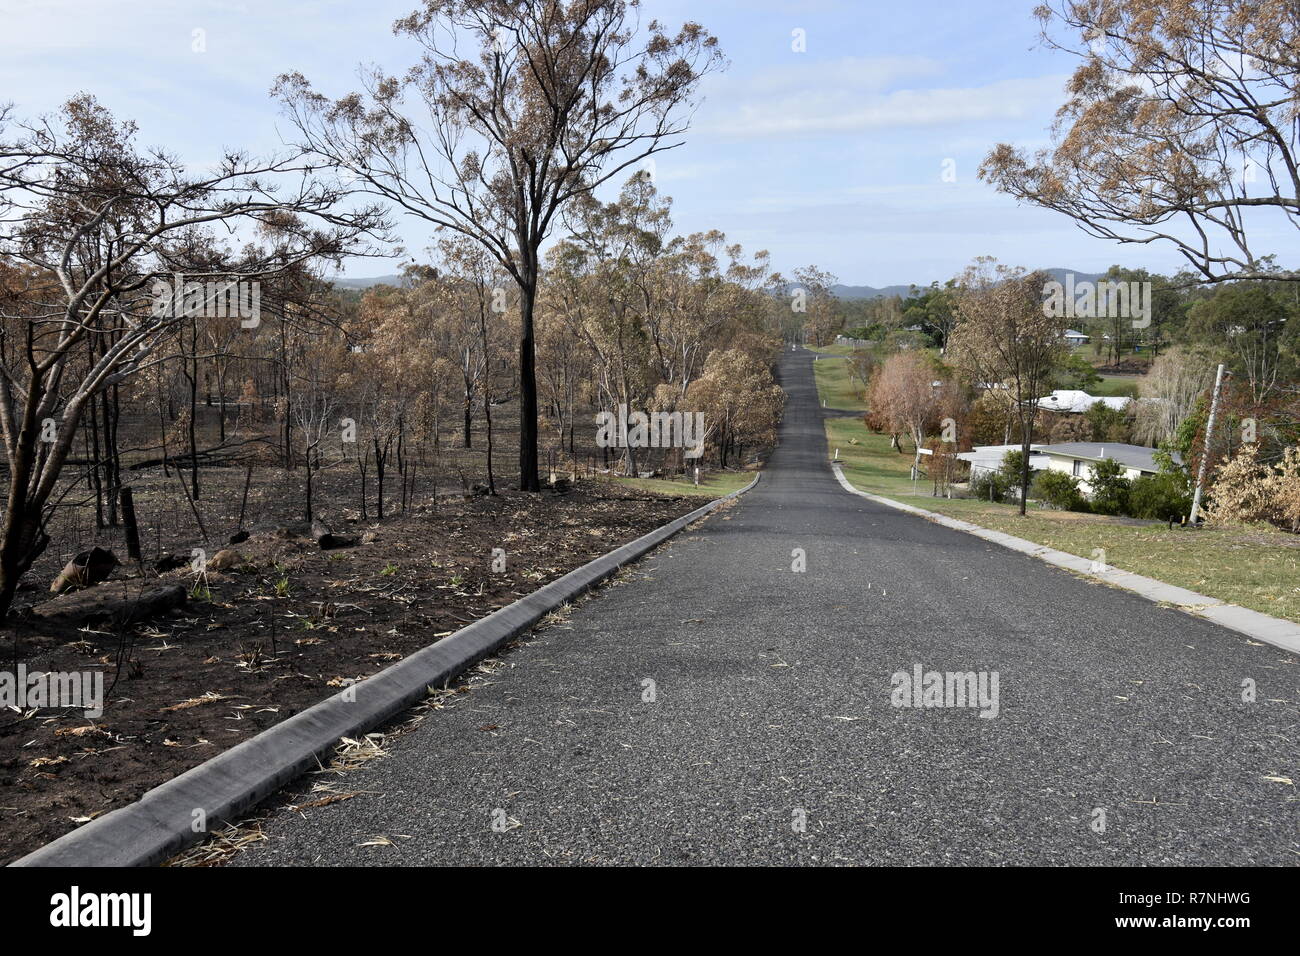 CENTRAL QUEENSLAND AFTER THE FIRES Stock Photo